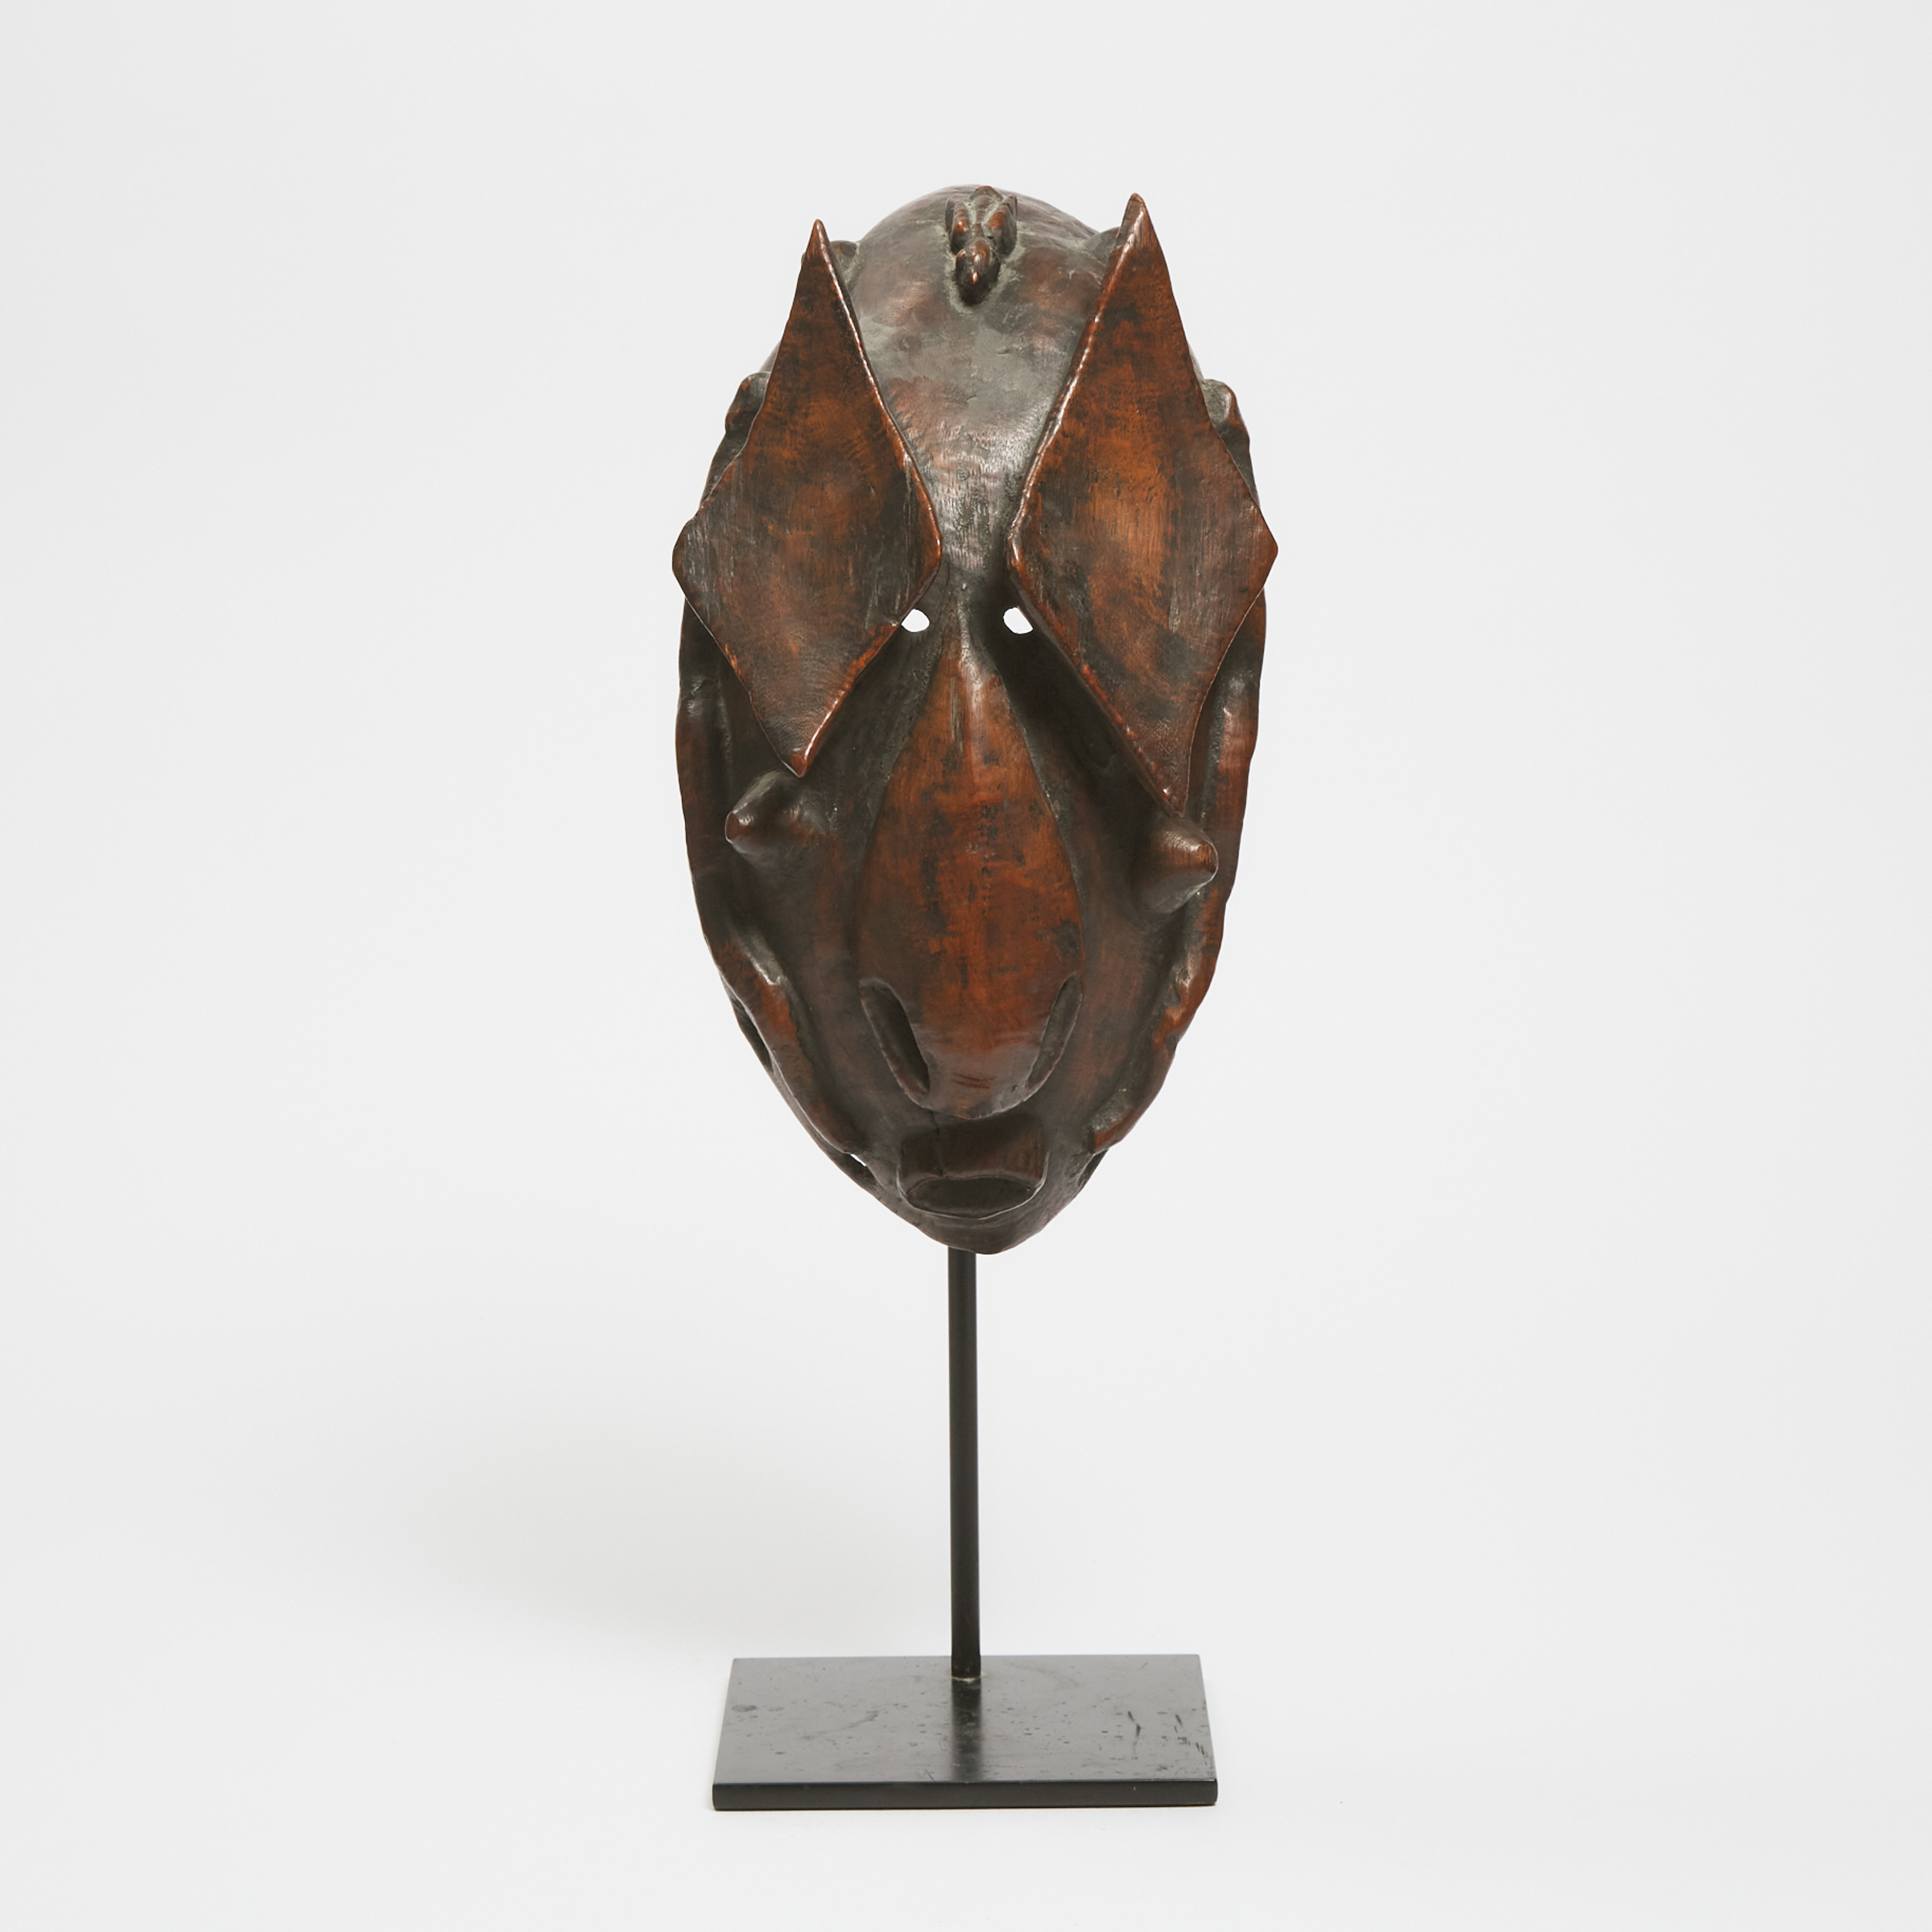 Unidentified African Mask, 20th century